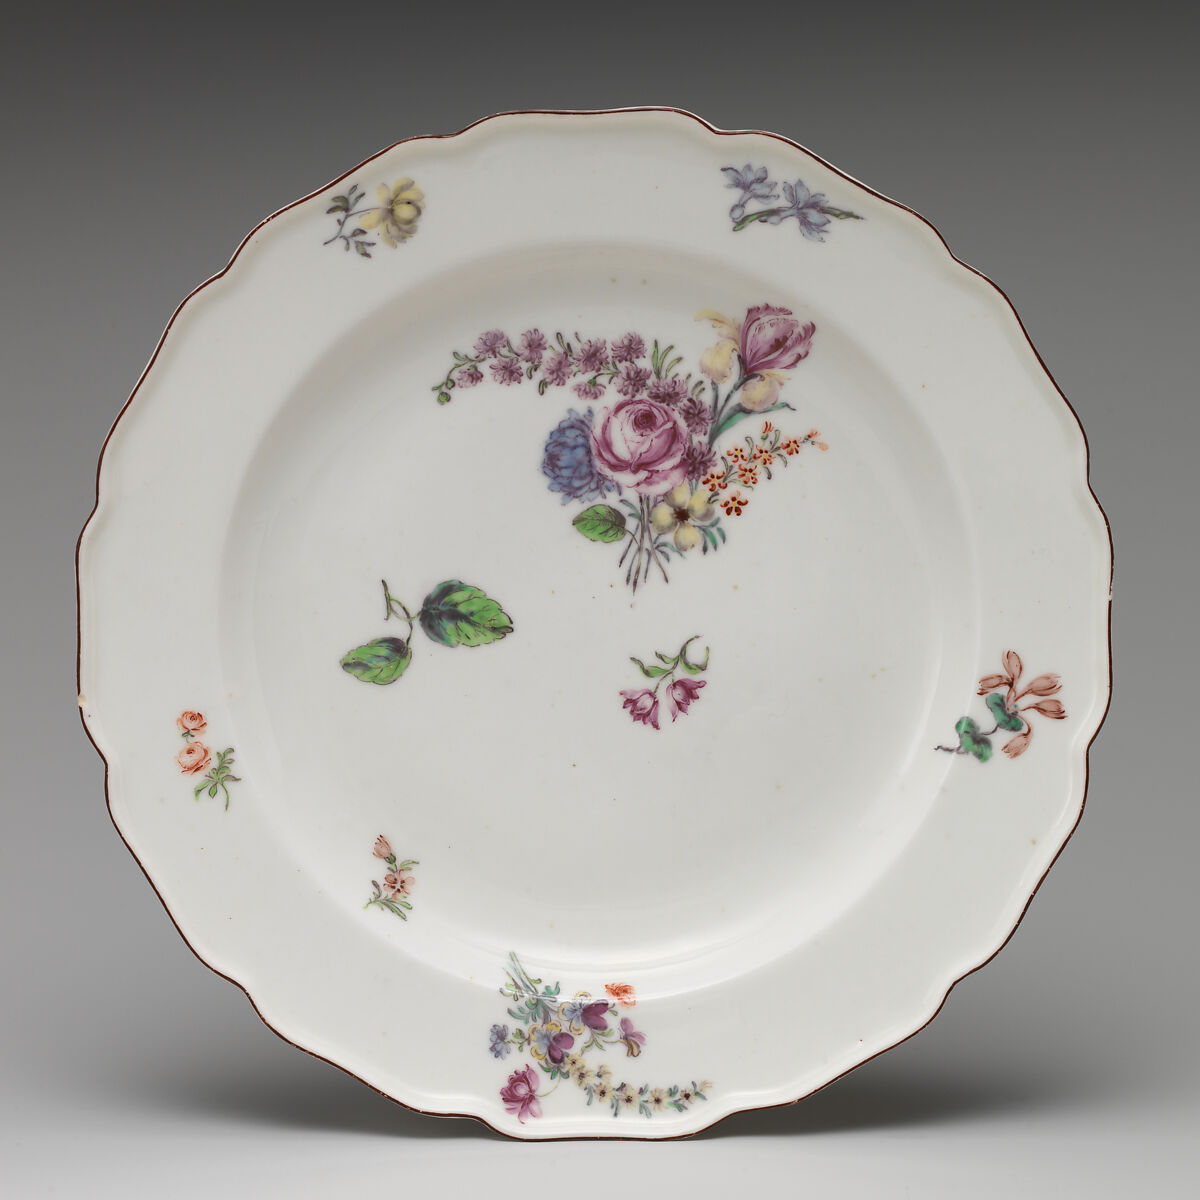 Plate (one of three), Chelsea Porcelain Manufactory (British, 1744–1784), Soft-paste porcelain, British, Chelsea 